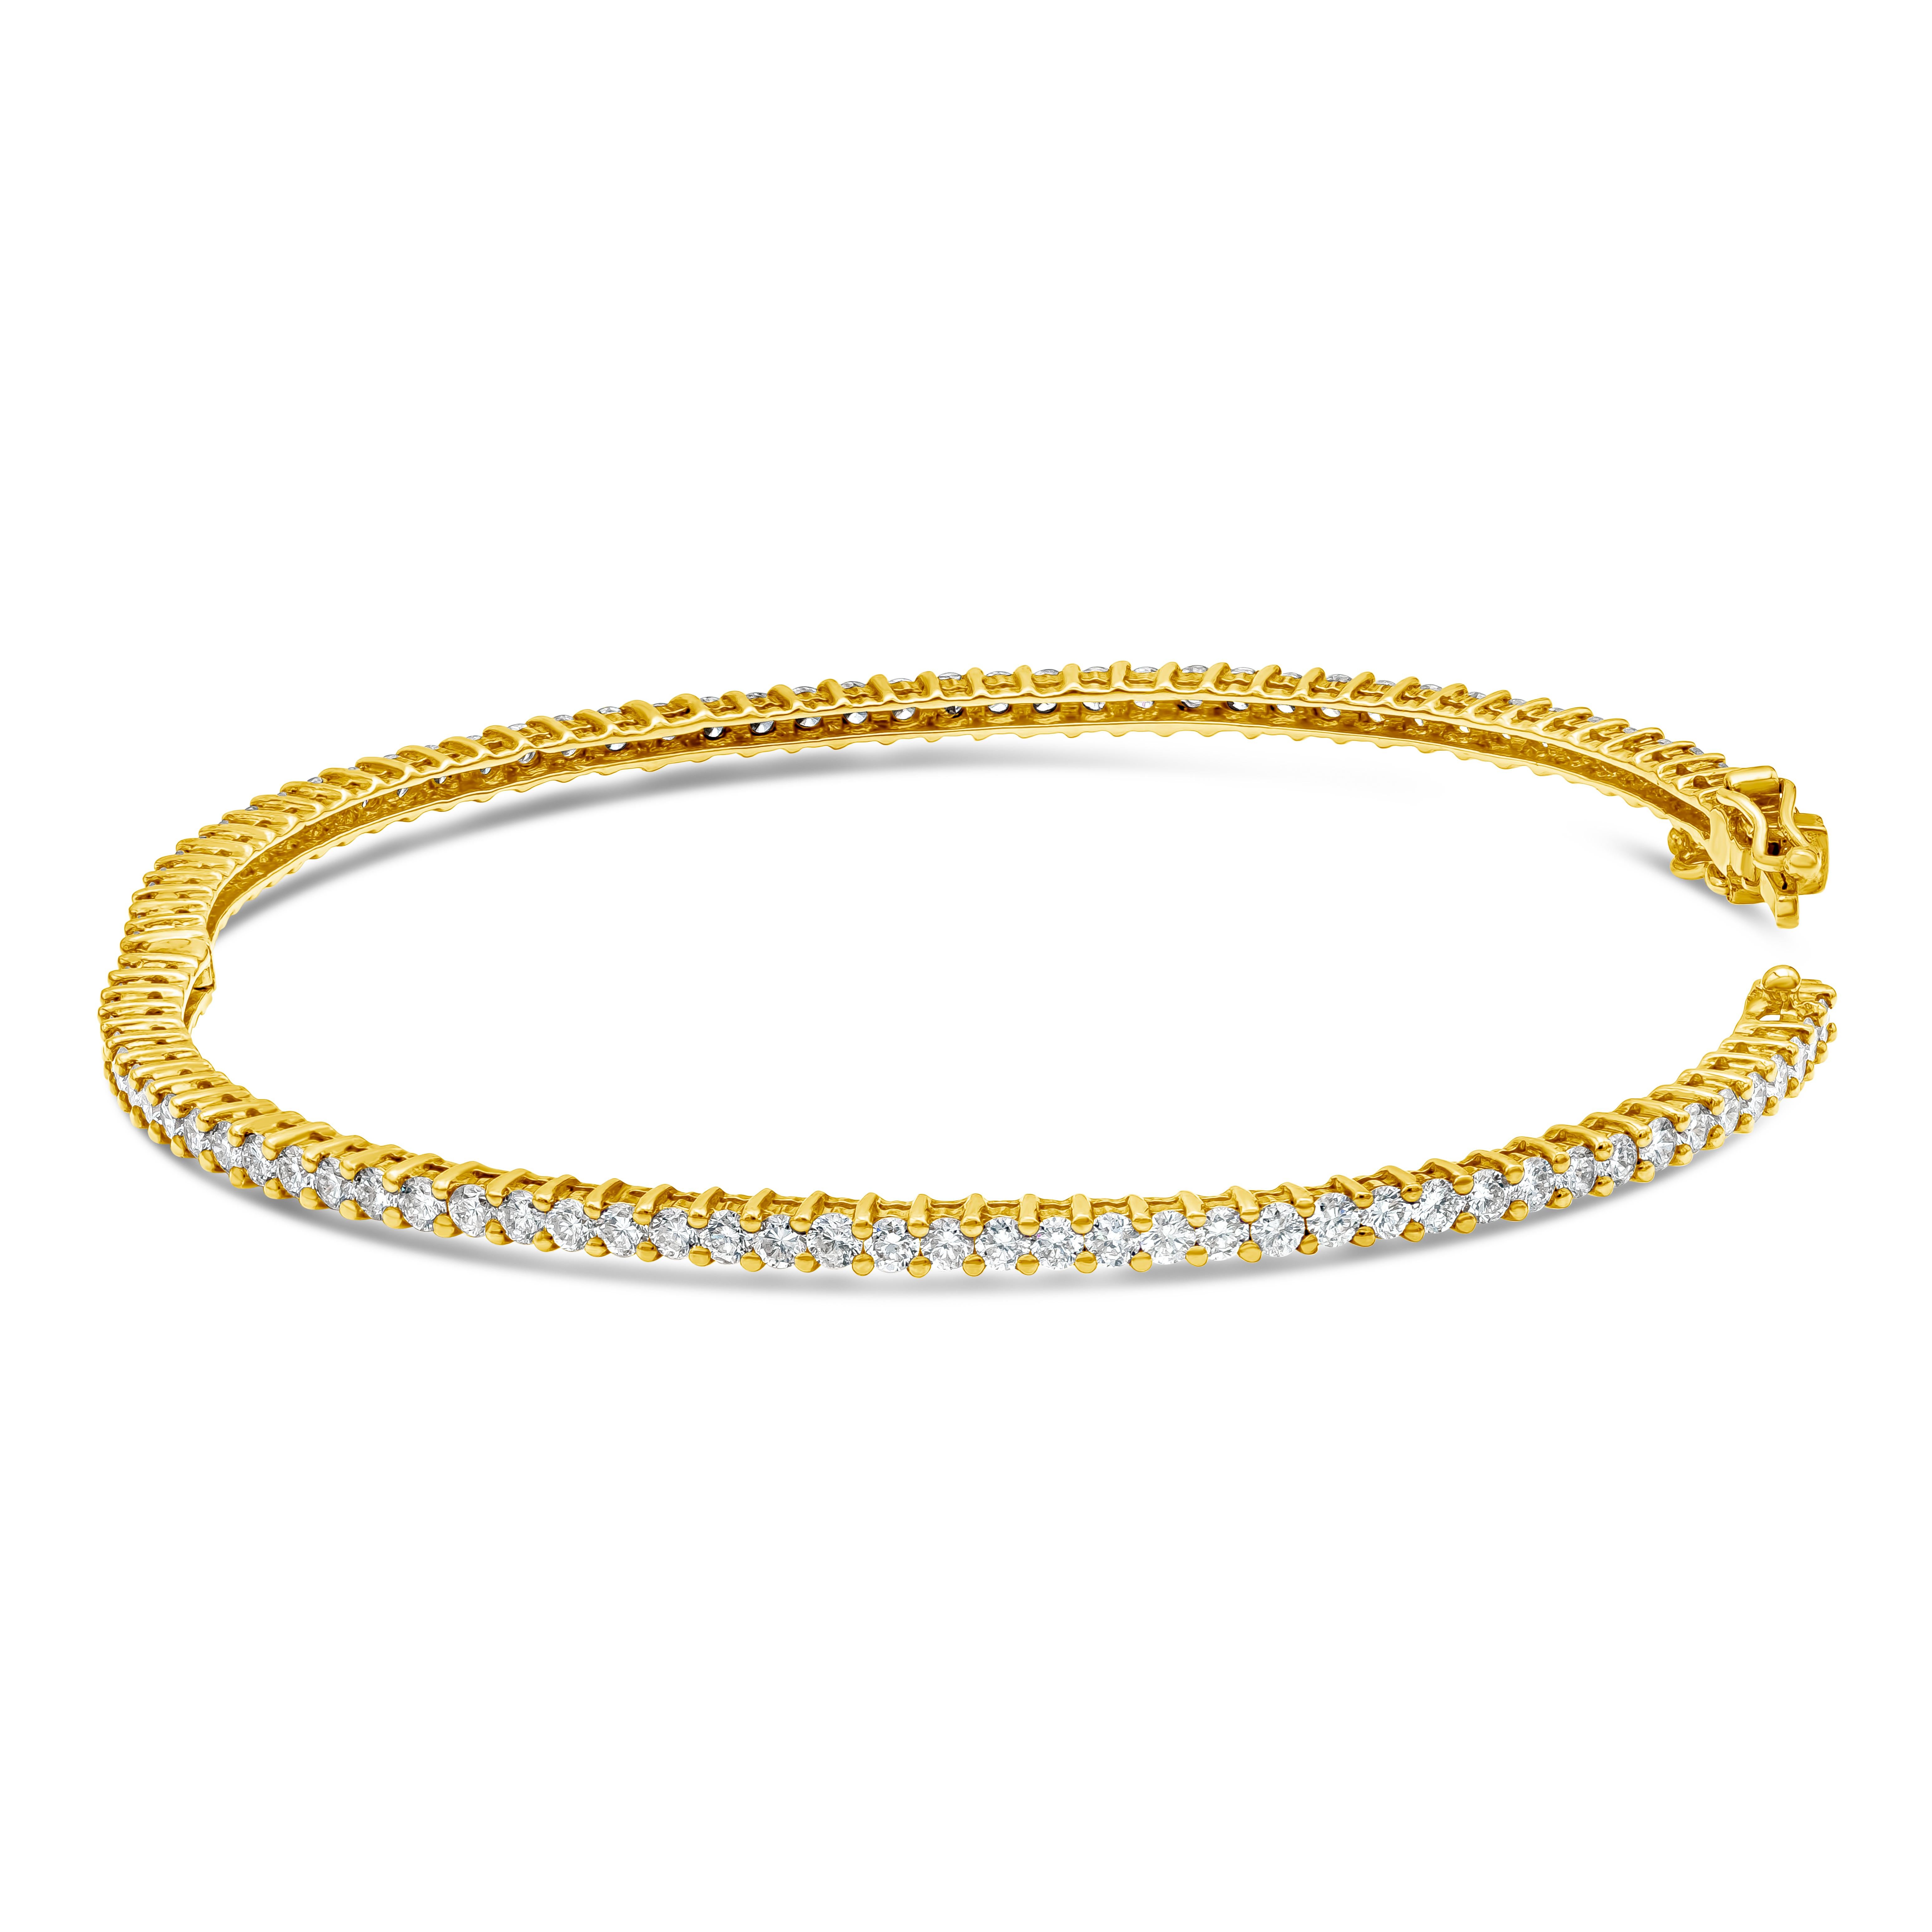 A classic bangle bracelet eternity encrusted with round brilliant diamonds weighing 2.78 carats total. Made with 18K Yellow Gold.

Roman Malakov is a custom house, specializing in creating anything you can imagine. If you would like to receive a